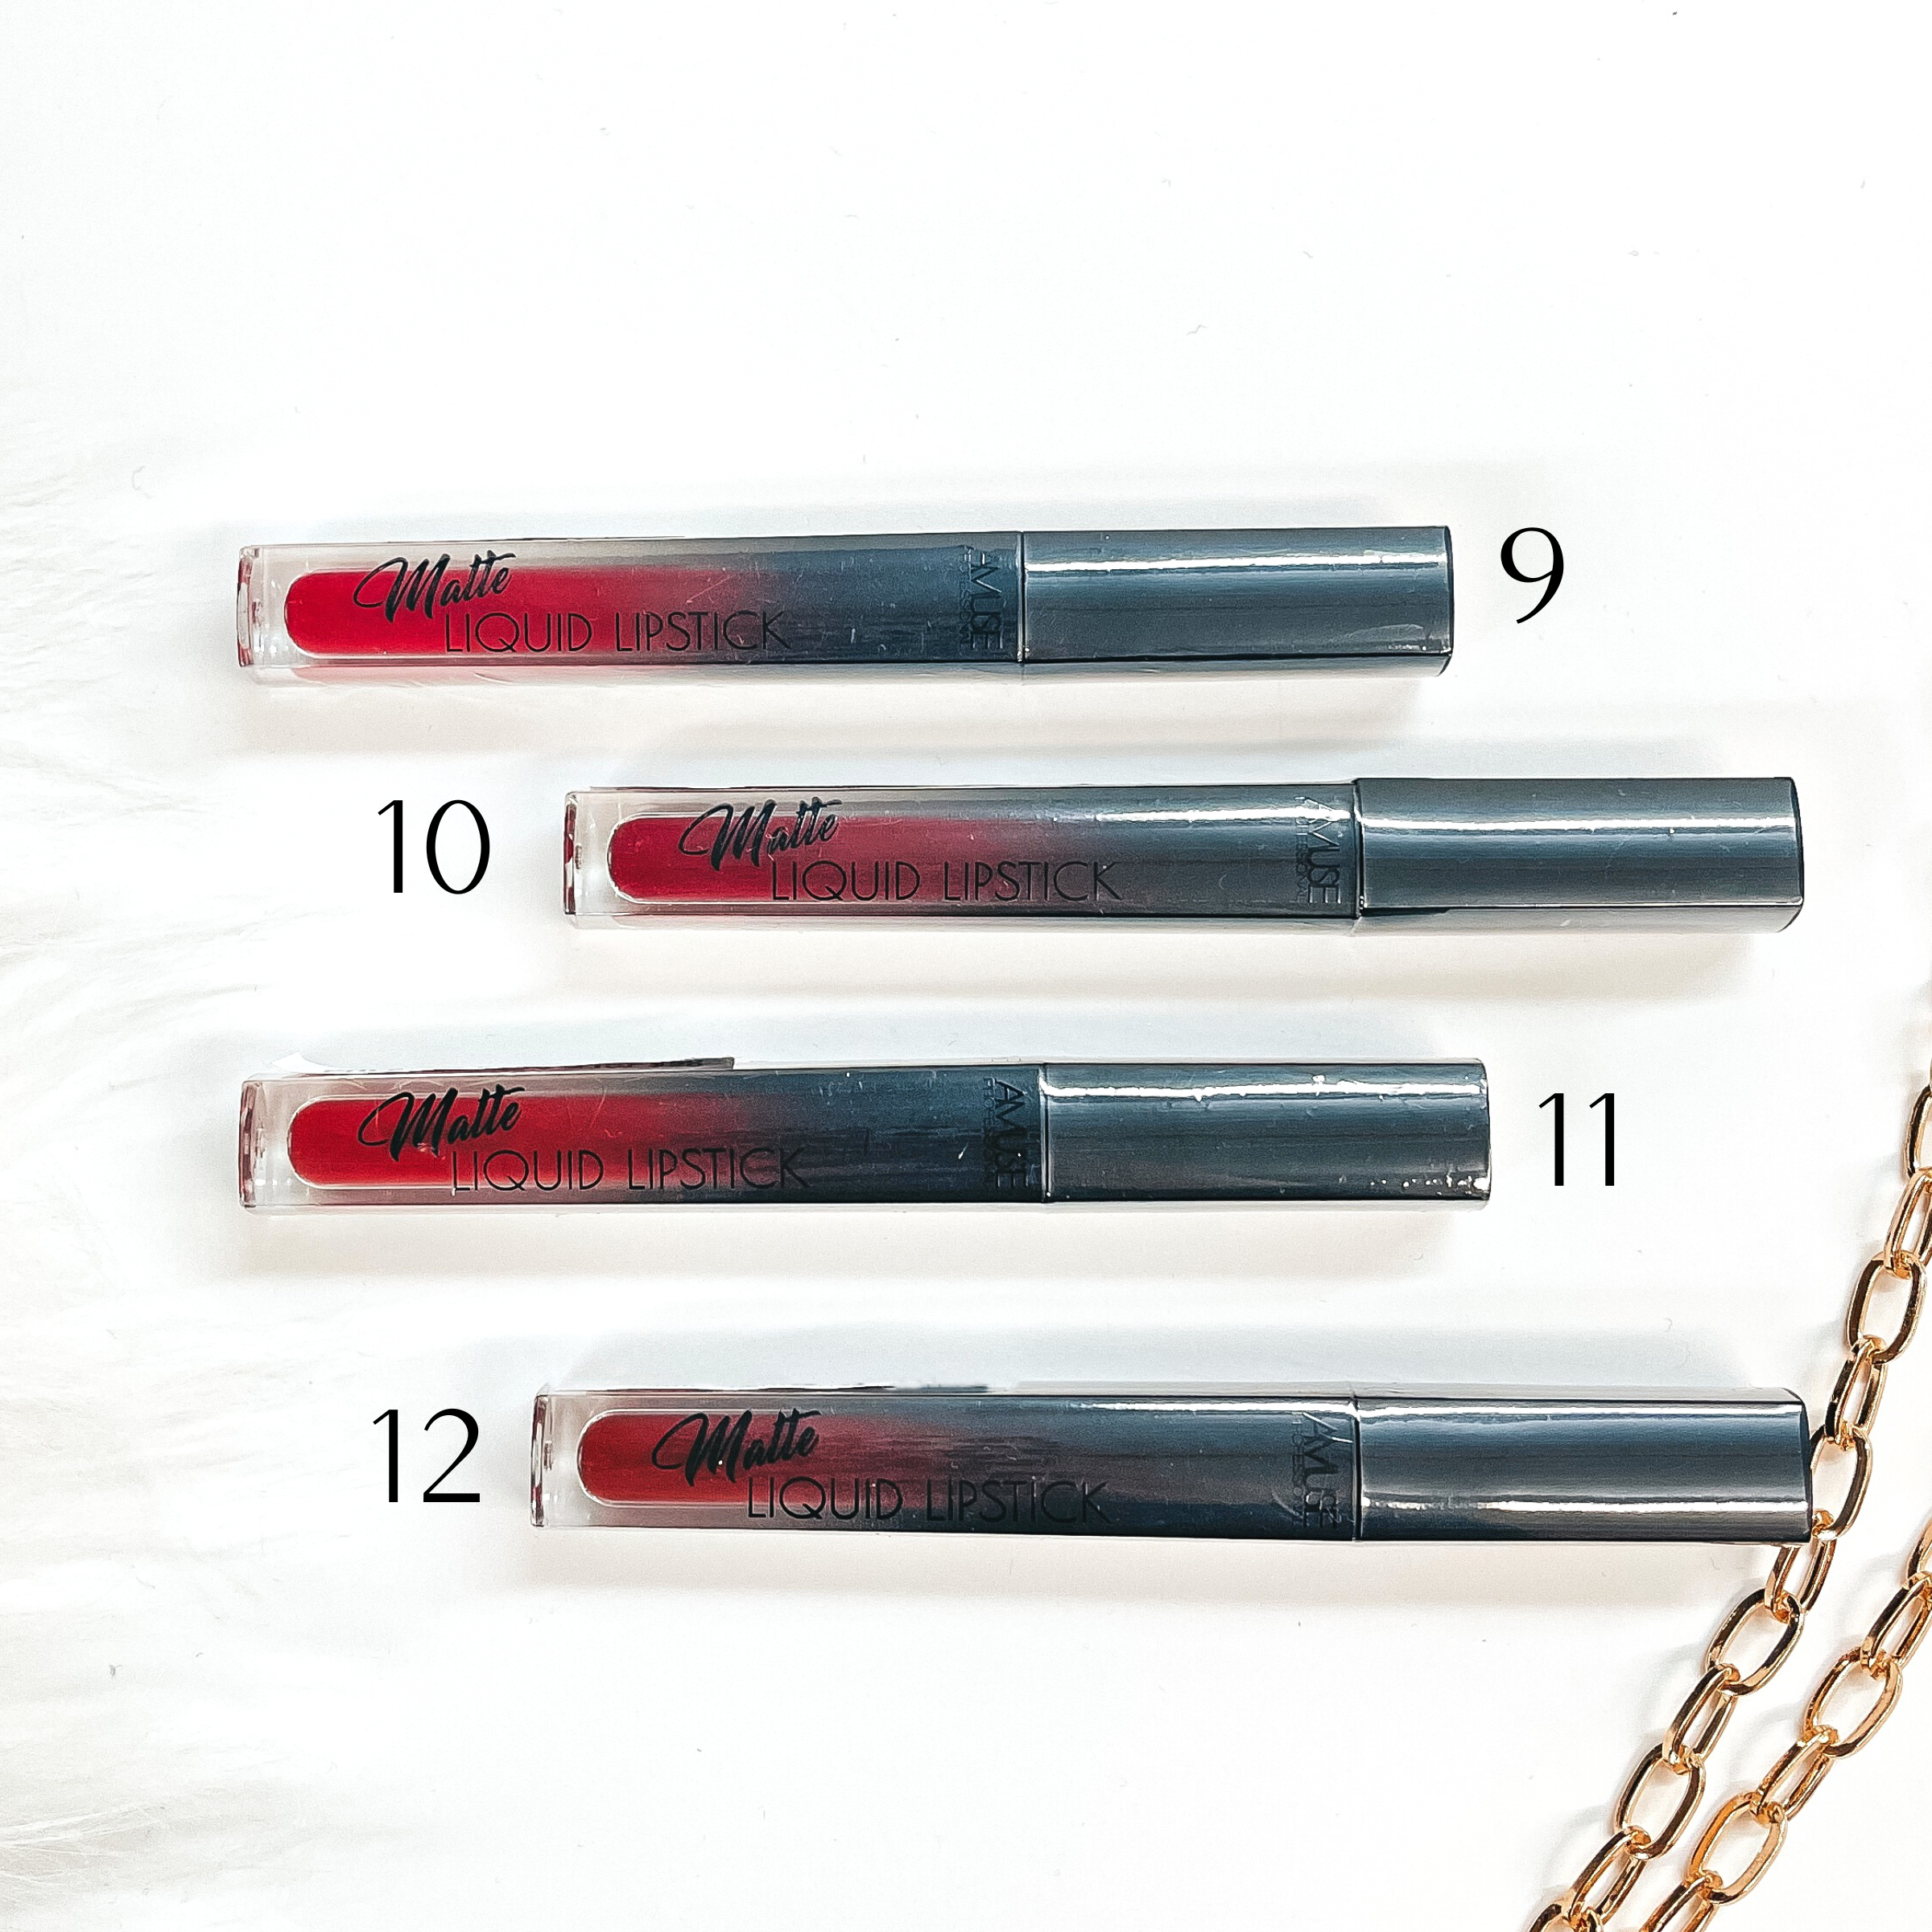 There are four liquid lipsticks in different shades of dark/bright reds laying on a white  background with white fur and a gold link chain in the side as decor.